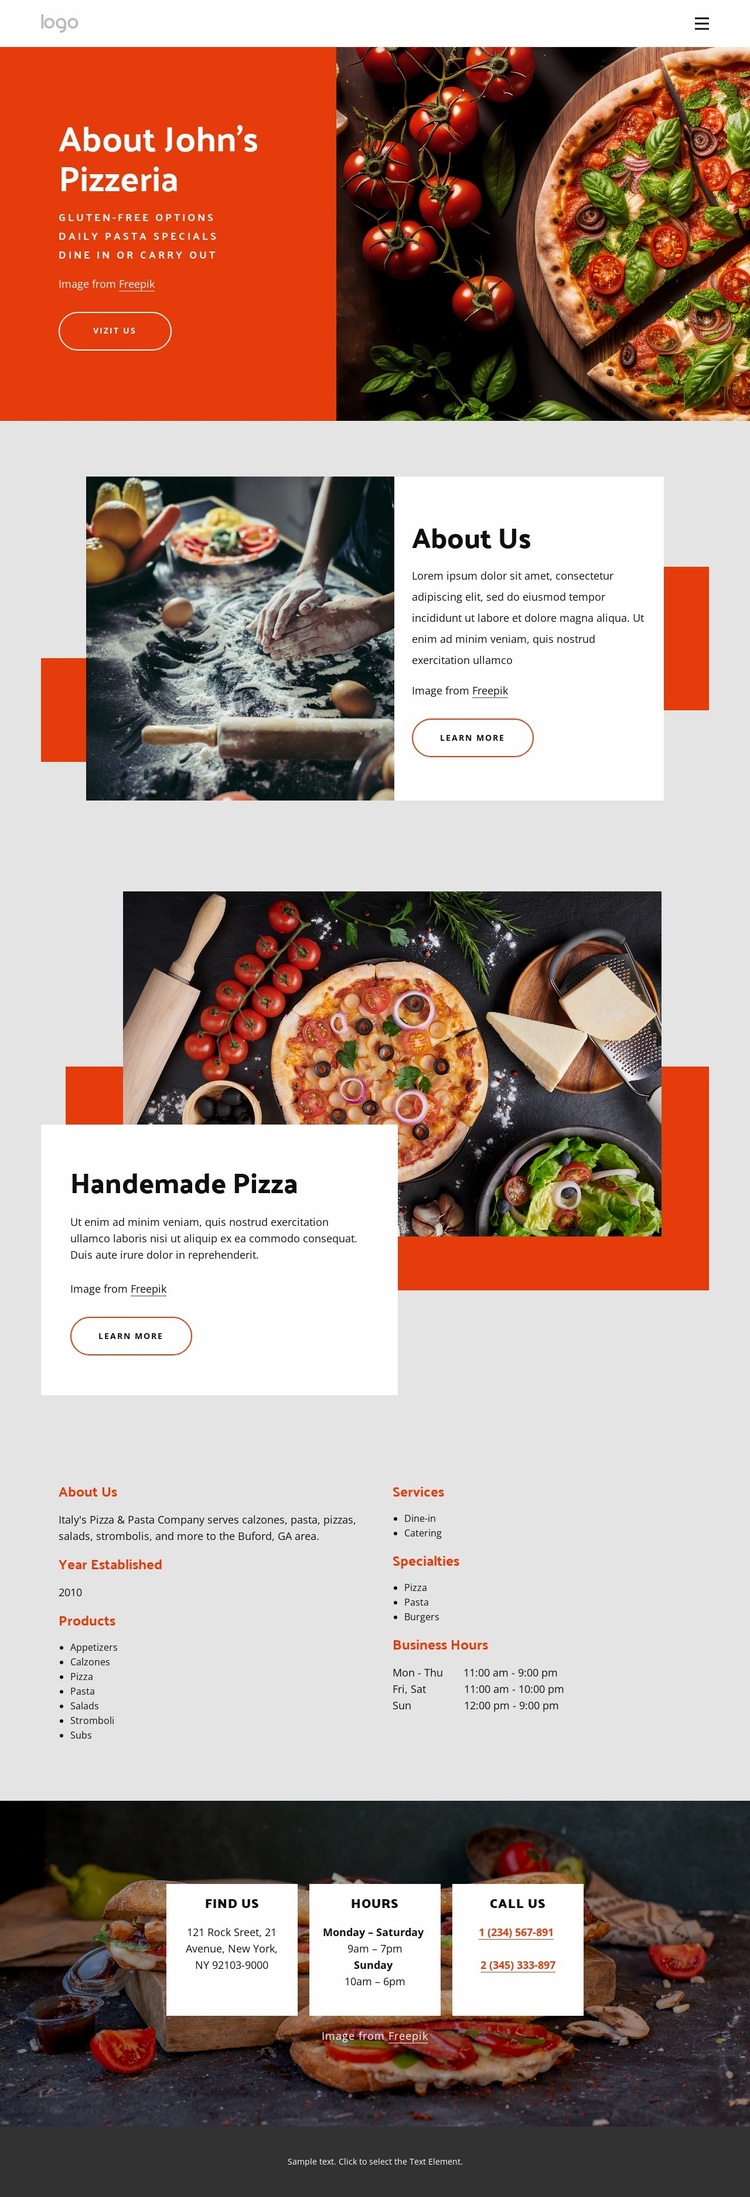 About our pizzeria Website Design